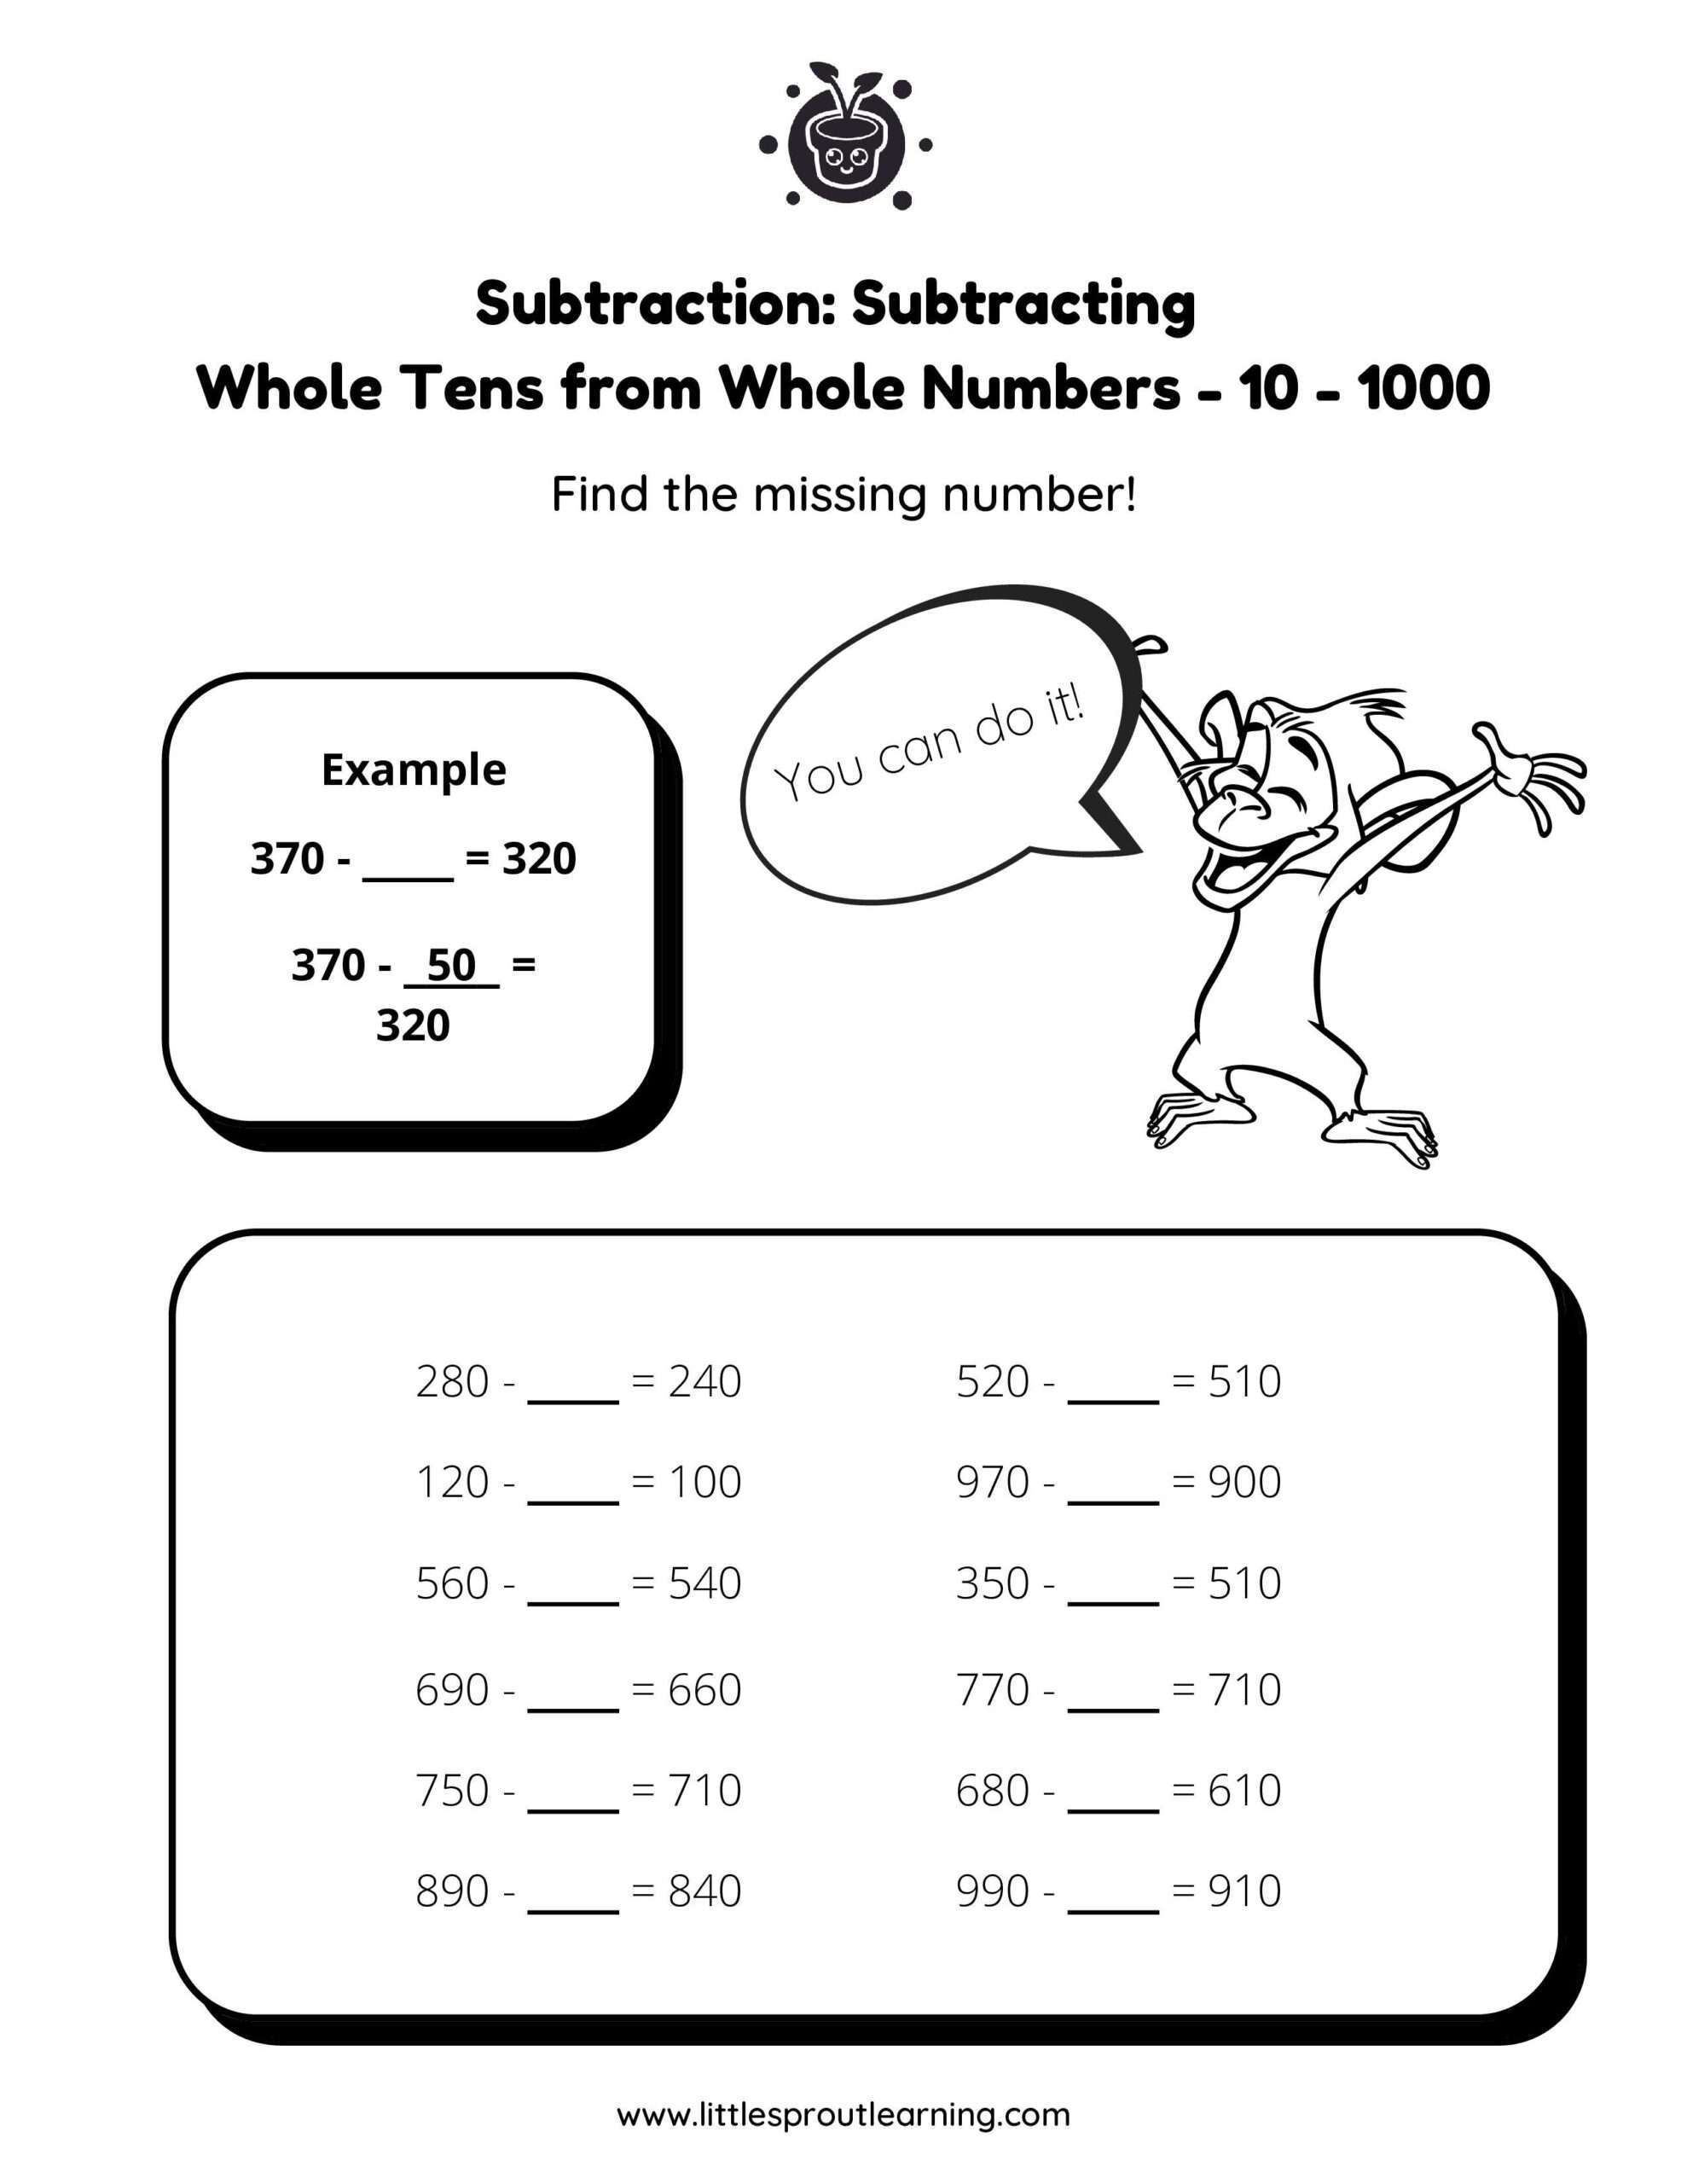 Subtract Whole tens From Whole Tens Within 0-1,000 – Missing Numbers